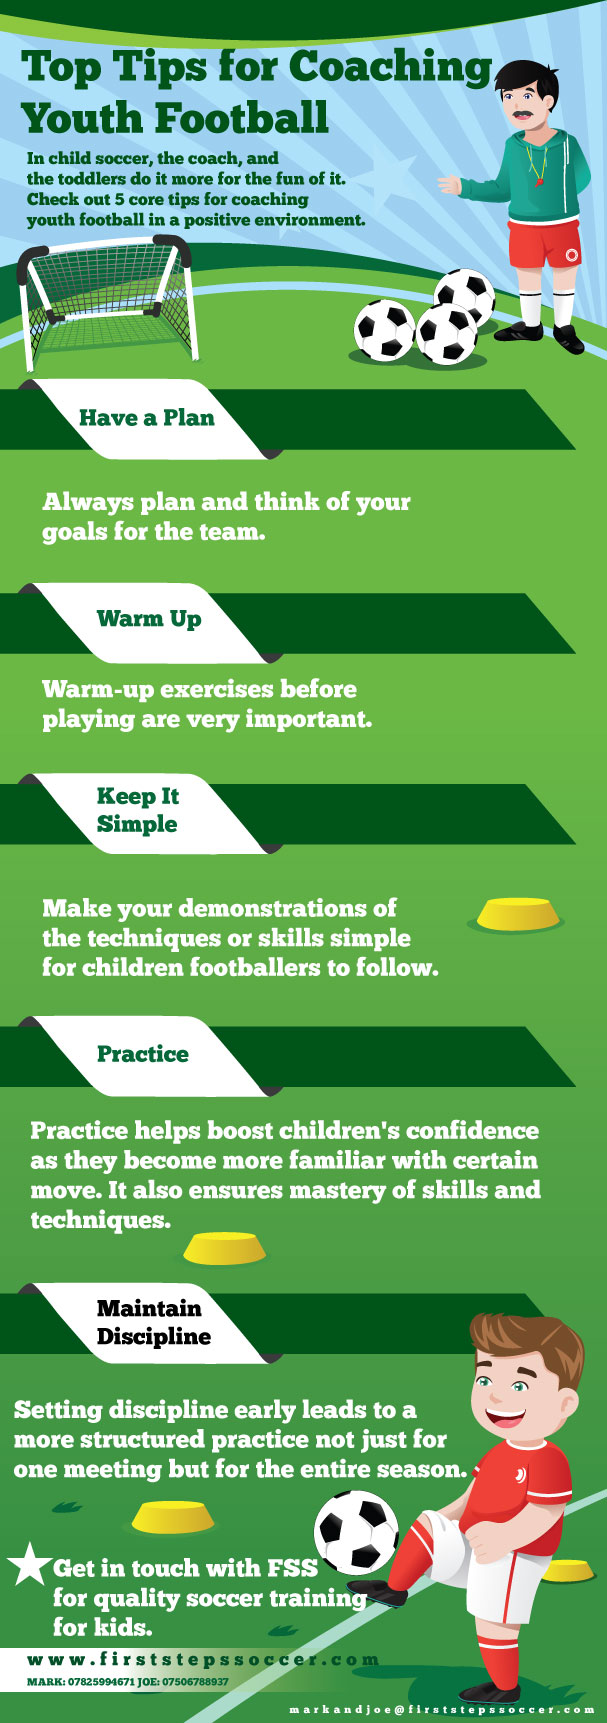 Top Tips for Coaching Youth Football